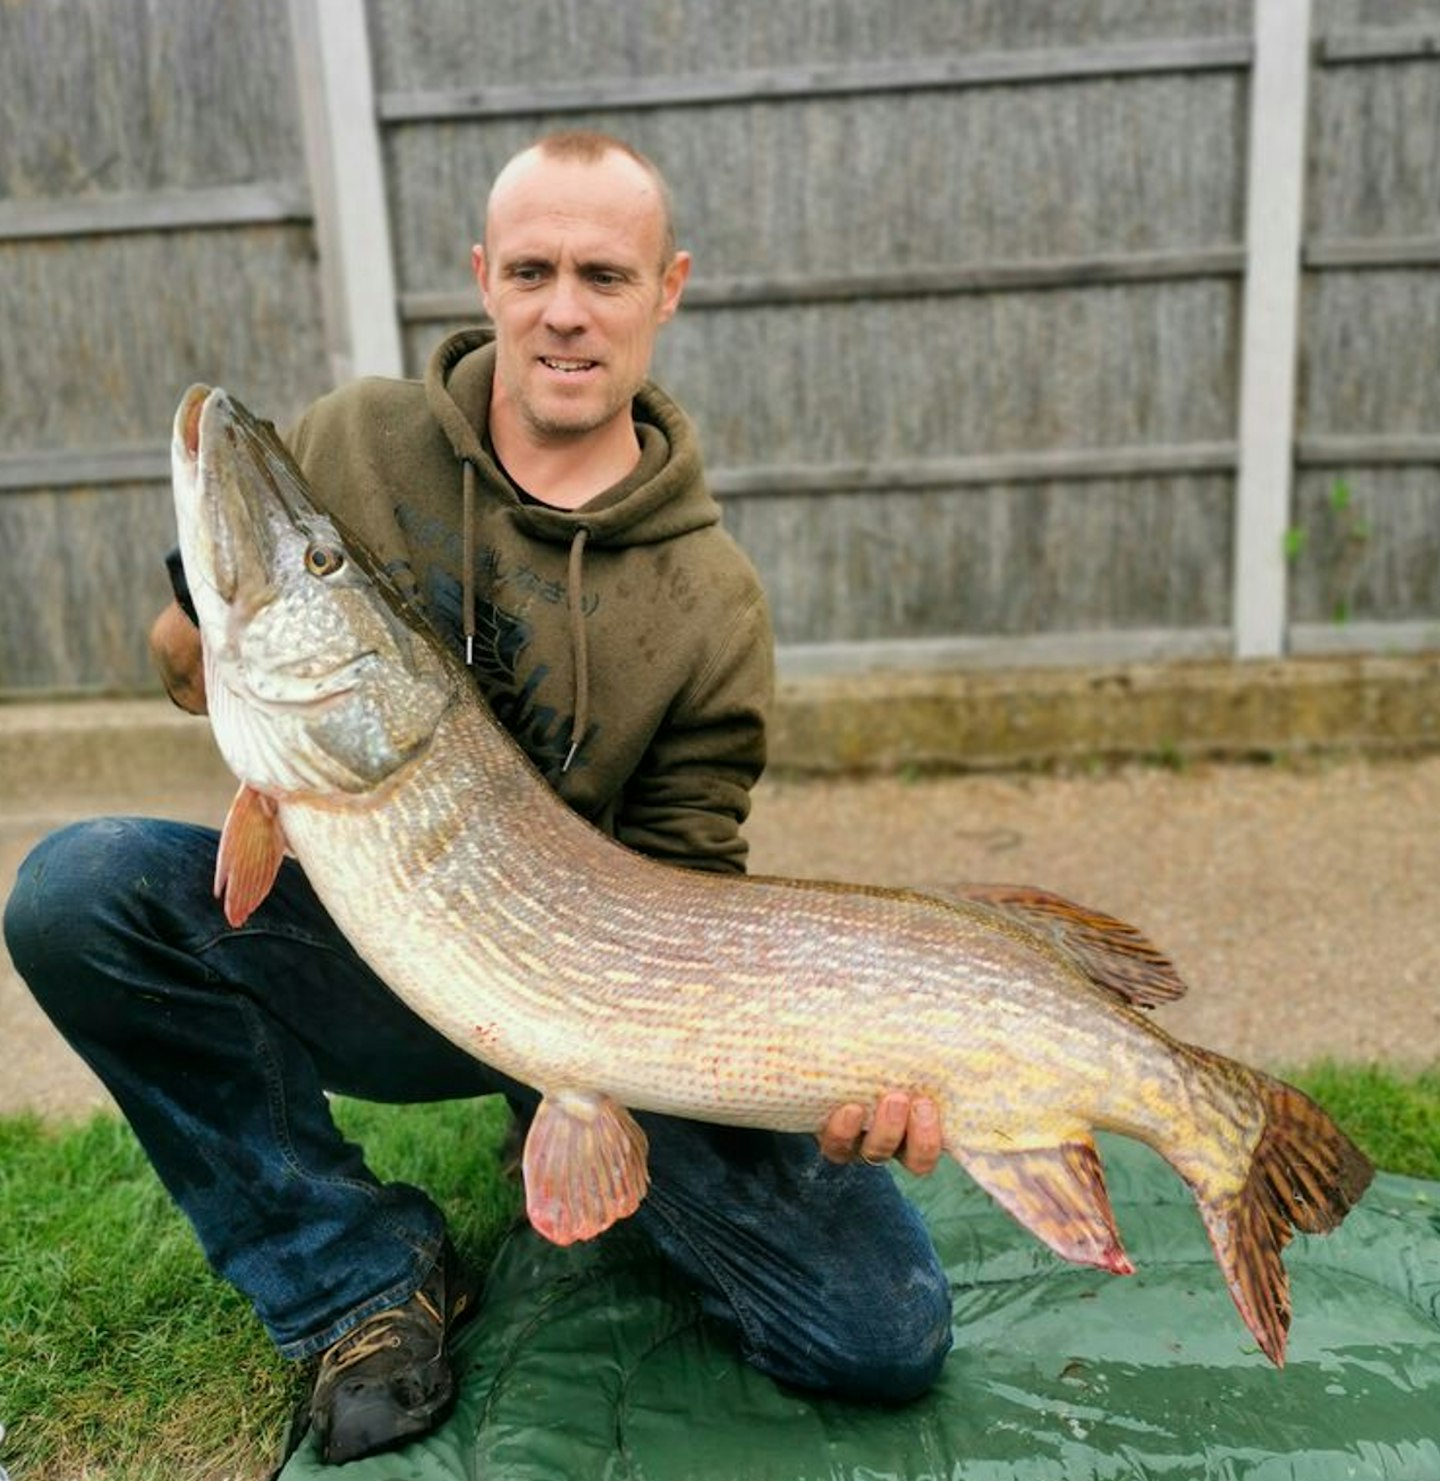 Graham Fitzgerald fished the River Thurne for this 33lb predator